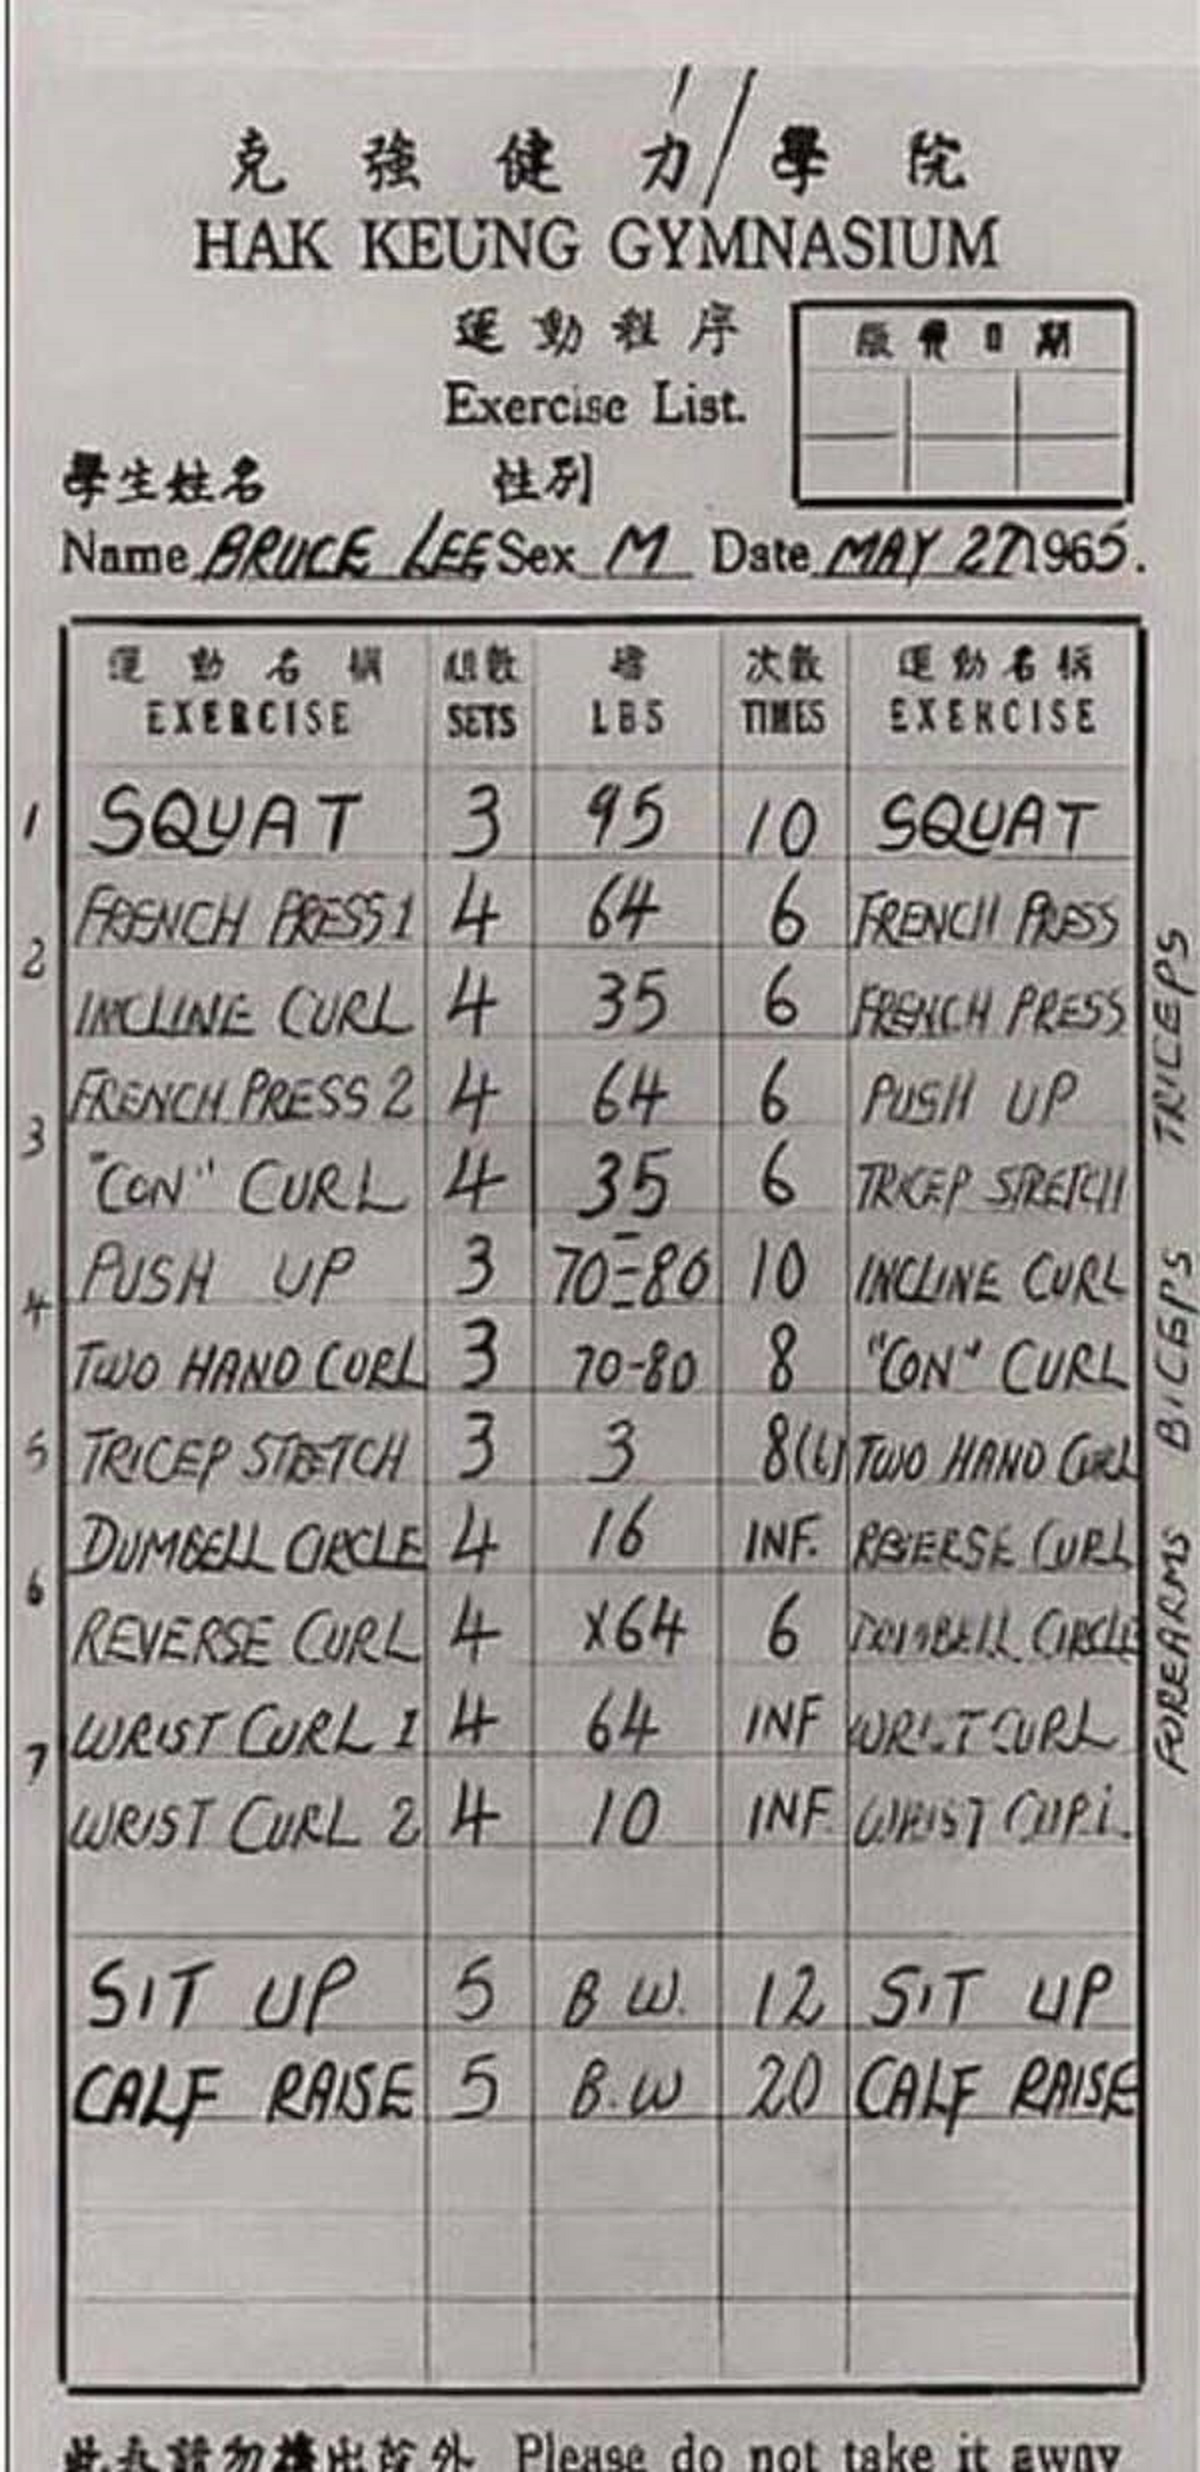 This is what Bruce Lee's workout routine was in 1965.